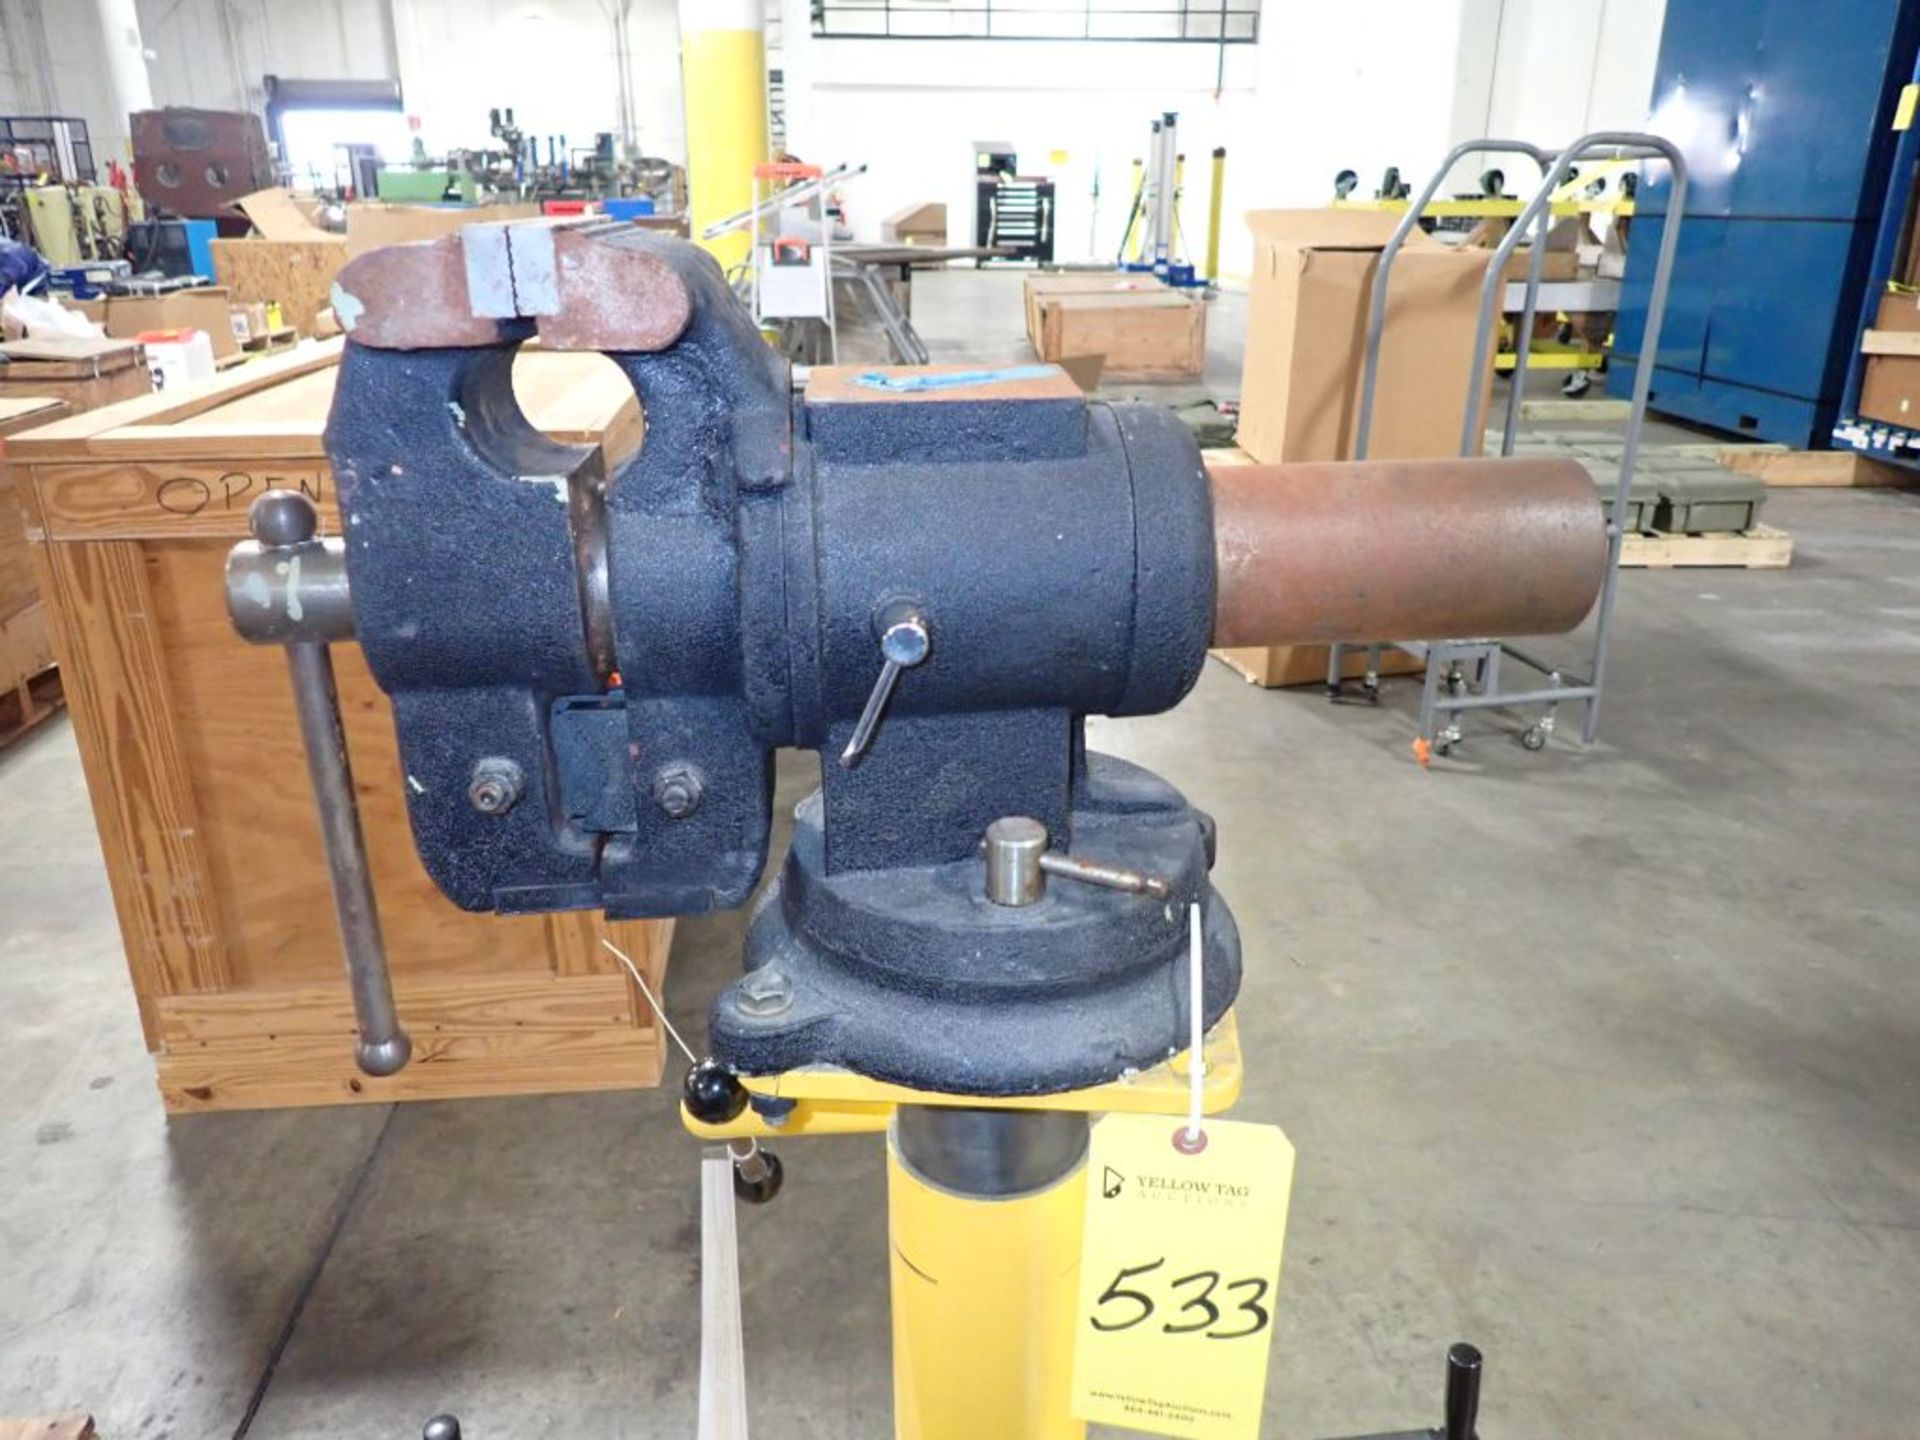 Portable Vise Stand | Tag: 241533 | Limited Forklift Assistance Available - $10.00 Lot Loading Fee - Image 2 of 2